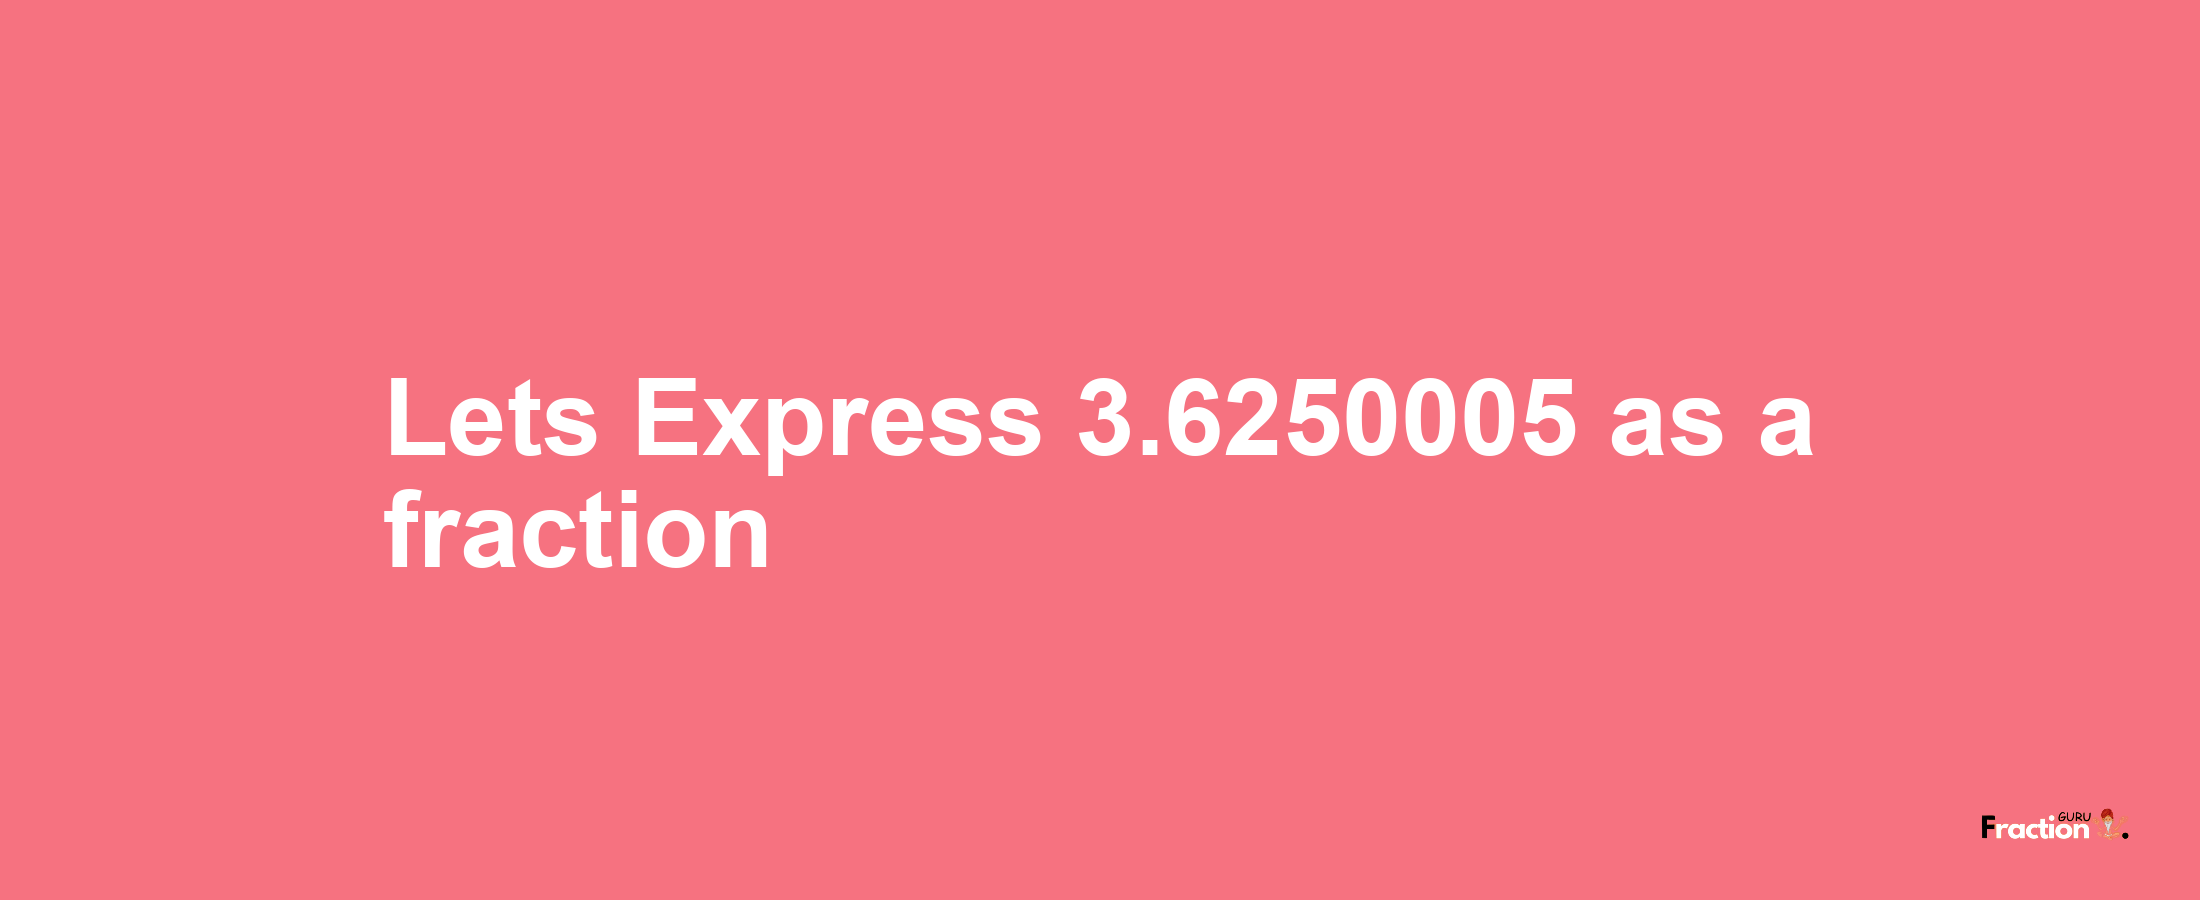 Lets Express 3.6250005 as afraction